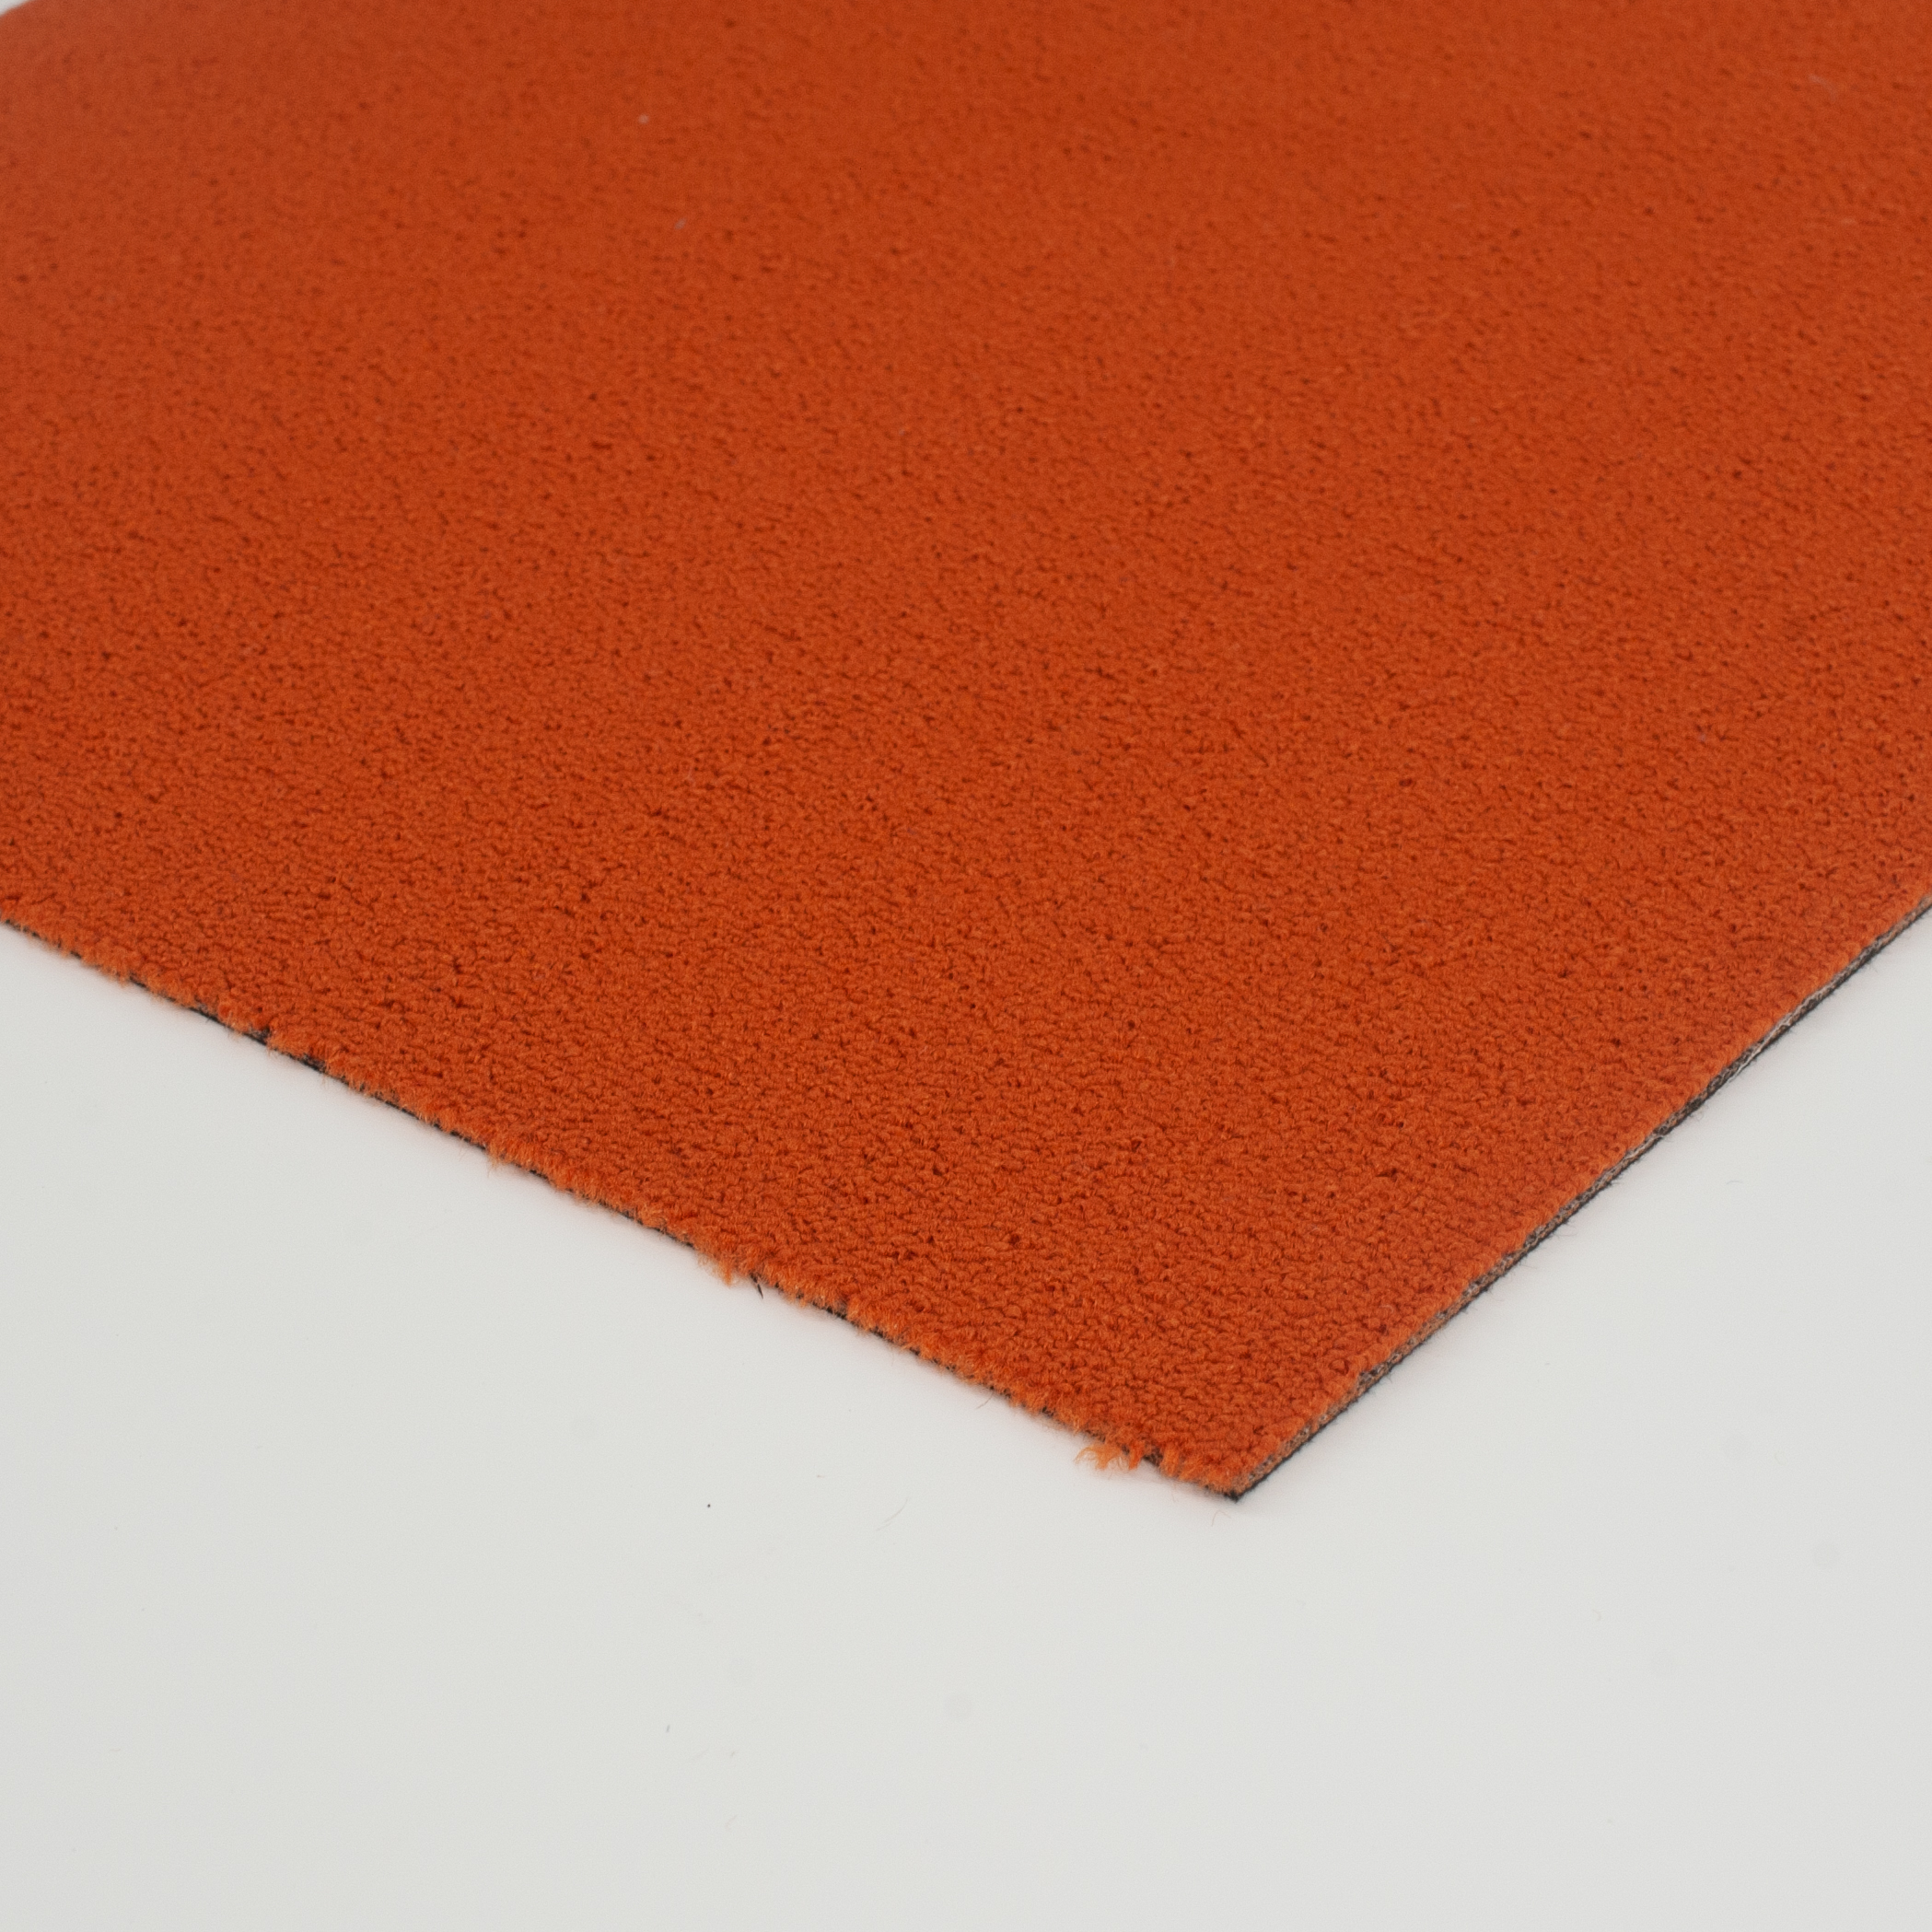 Large Recyclable Colorful Carpet Tiles